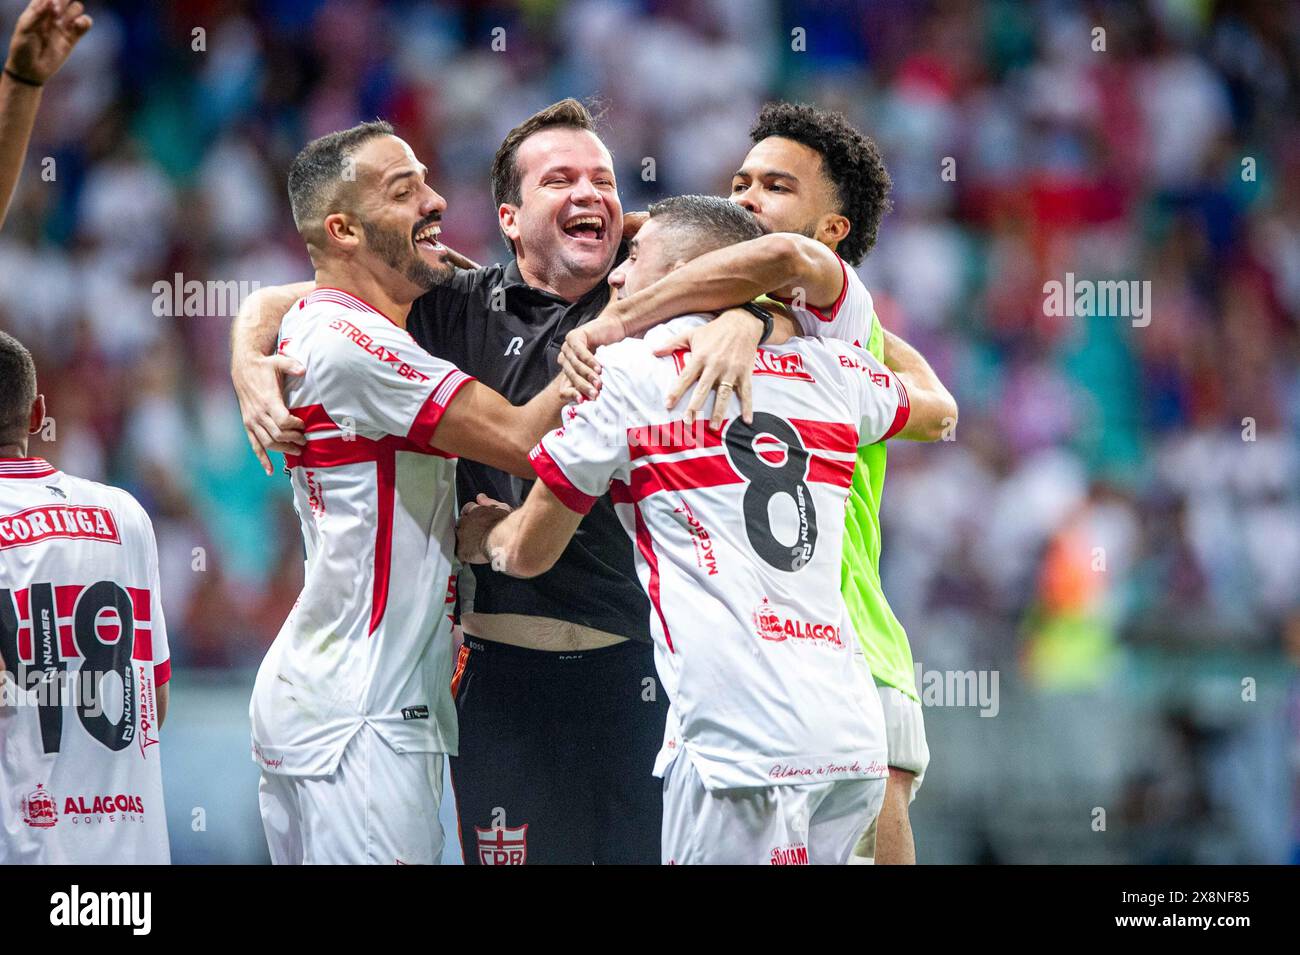 Salvador, Brazil. 26th May, 2024. BA - SALVADOR - 05/26/2024 - COPA DO NORDESTE 2024, BAHIA x CRB - CRB players celebrate victory at the end of the match against Bahia at the Arena Fonte Nova stadium for the Copa Do Nordeste 2024 championship. Photo: Jhony Pinho/AGIF Credit: AGIF/Alamy Live News Stock Photo